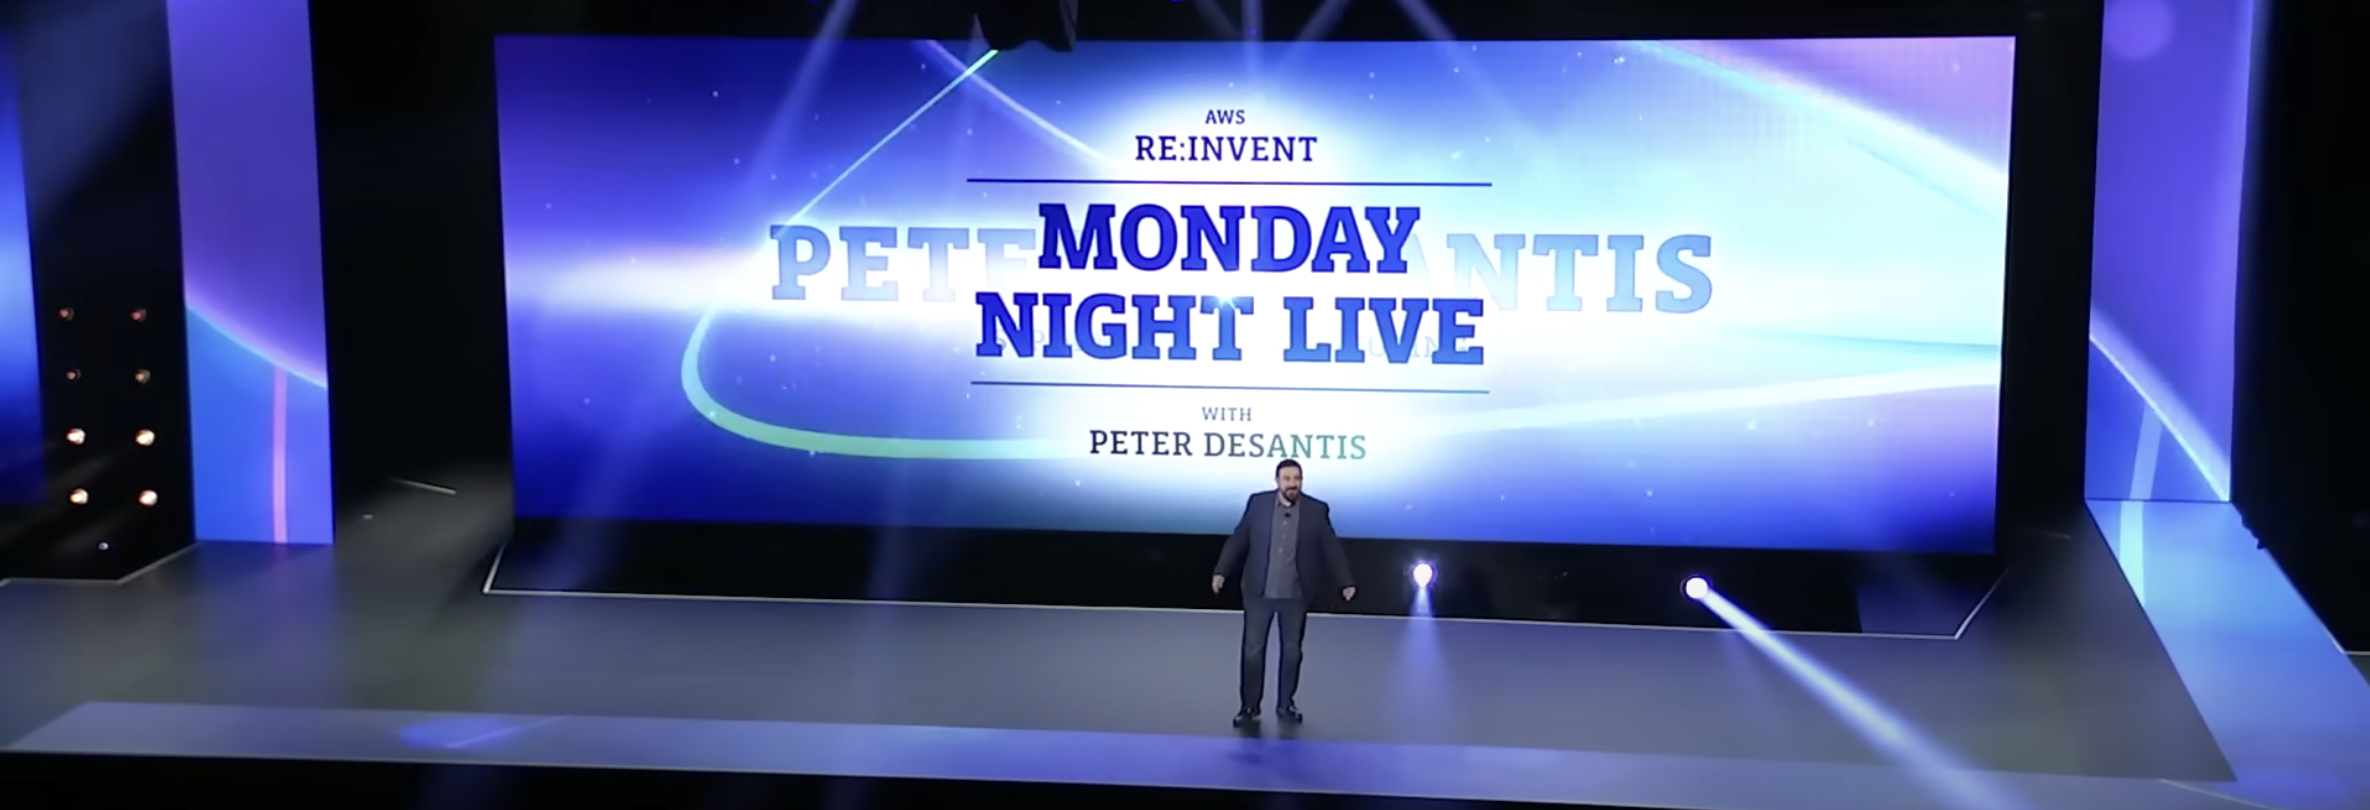 Think in Context AWS reInvent 2022 Monday Night Live Keynote With